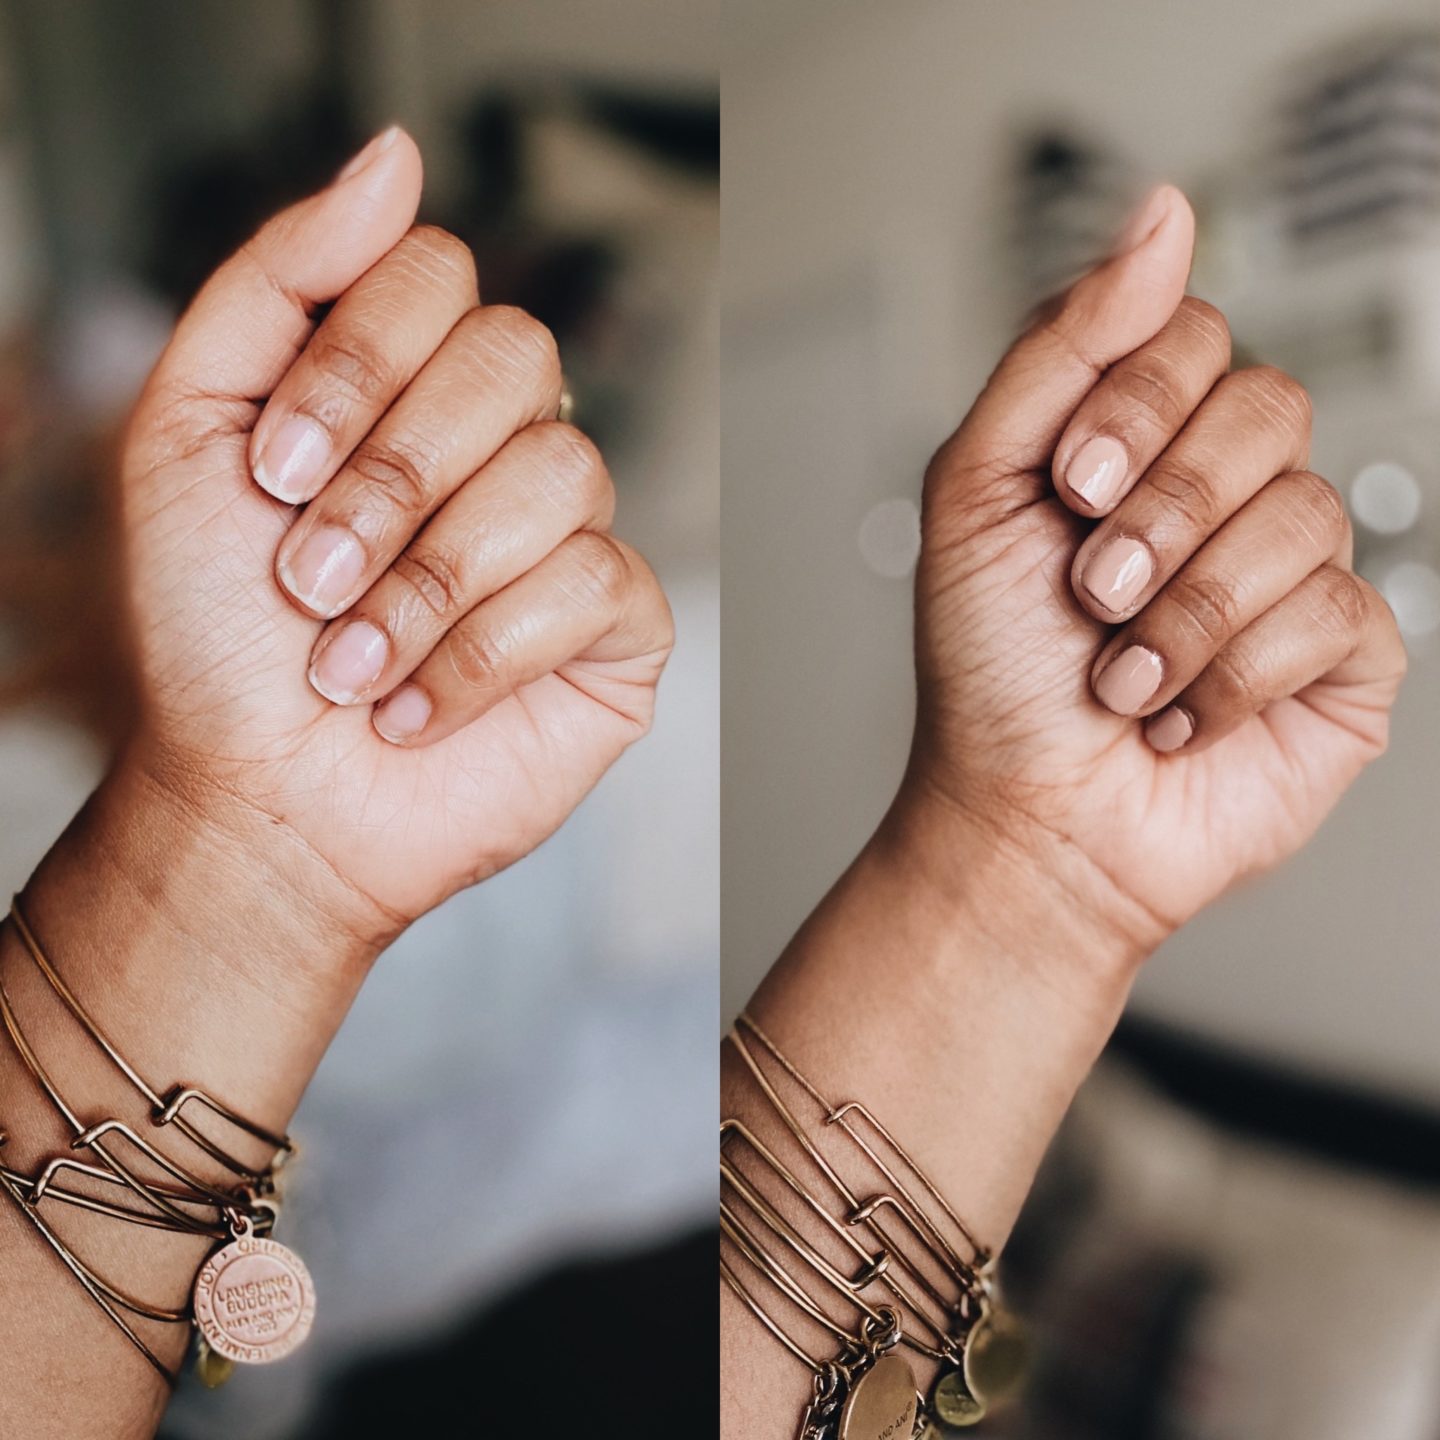 How to Give Yourself an At-Home Manicure